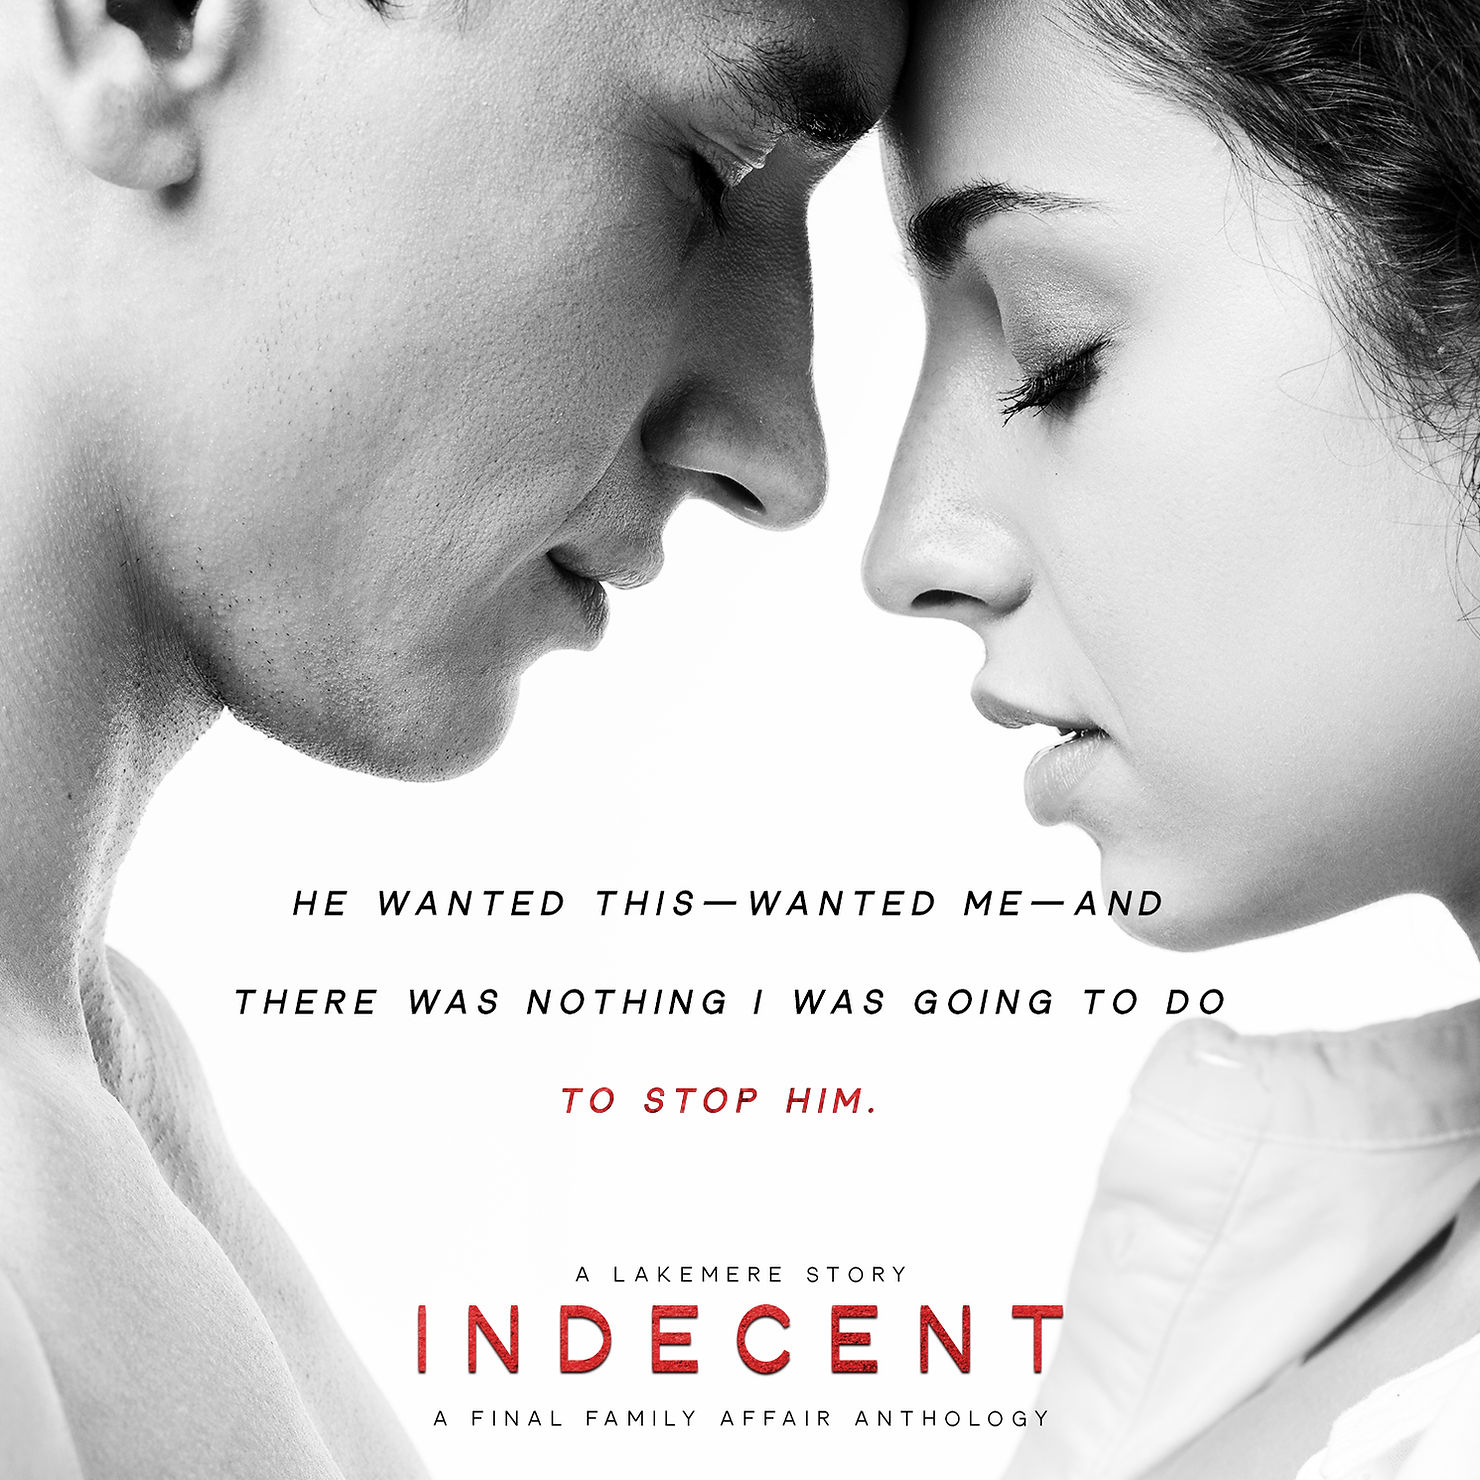 amy sadek recommends the indecent family movie pic